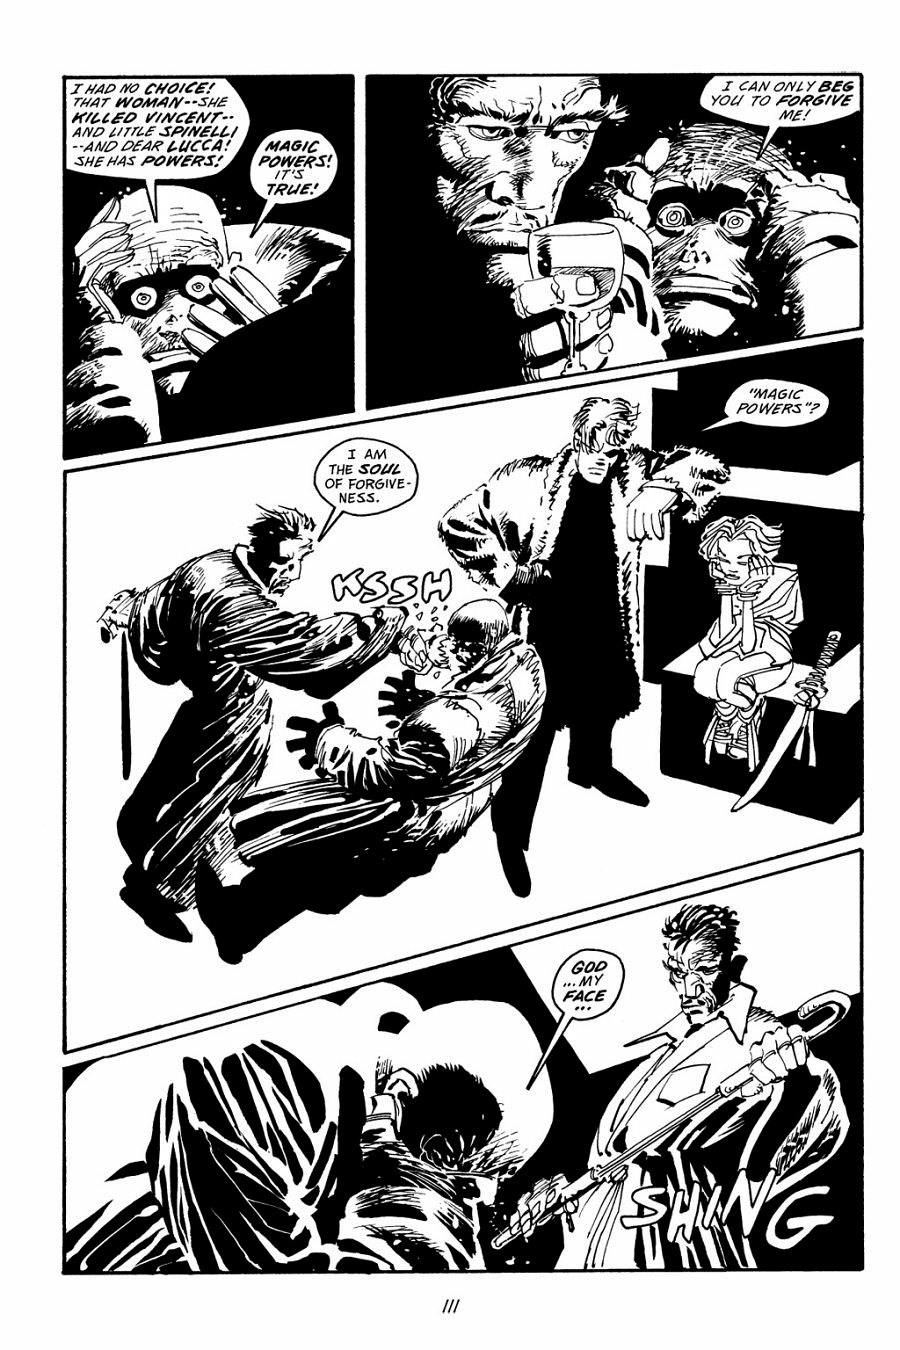 page 111 of sin city 5 family values